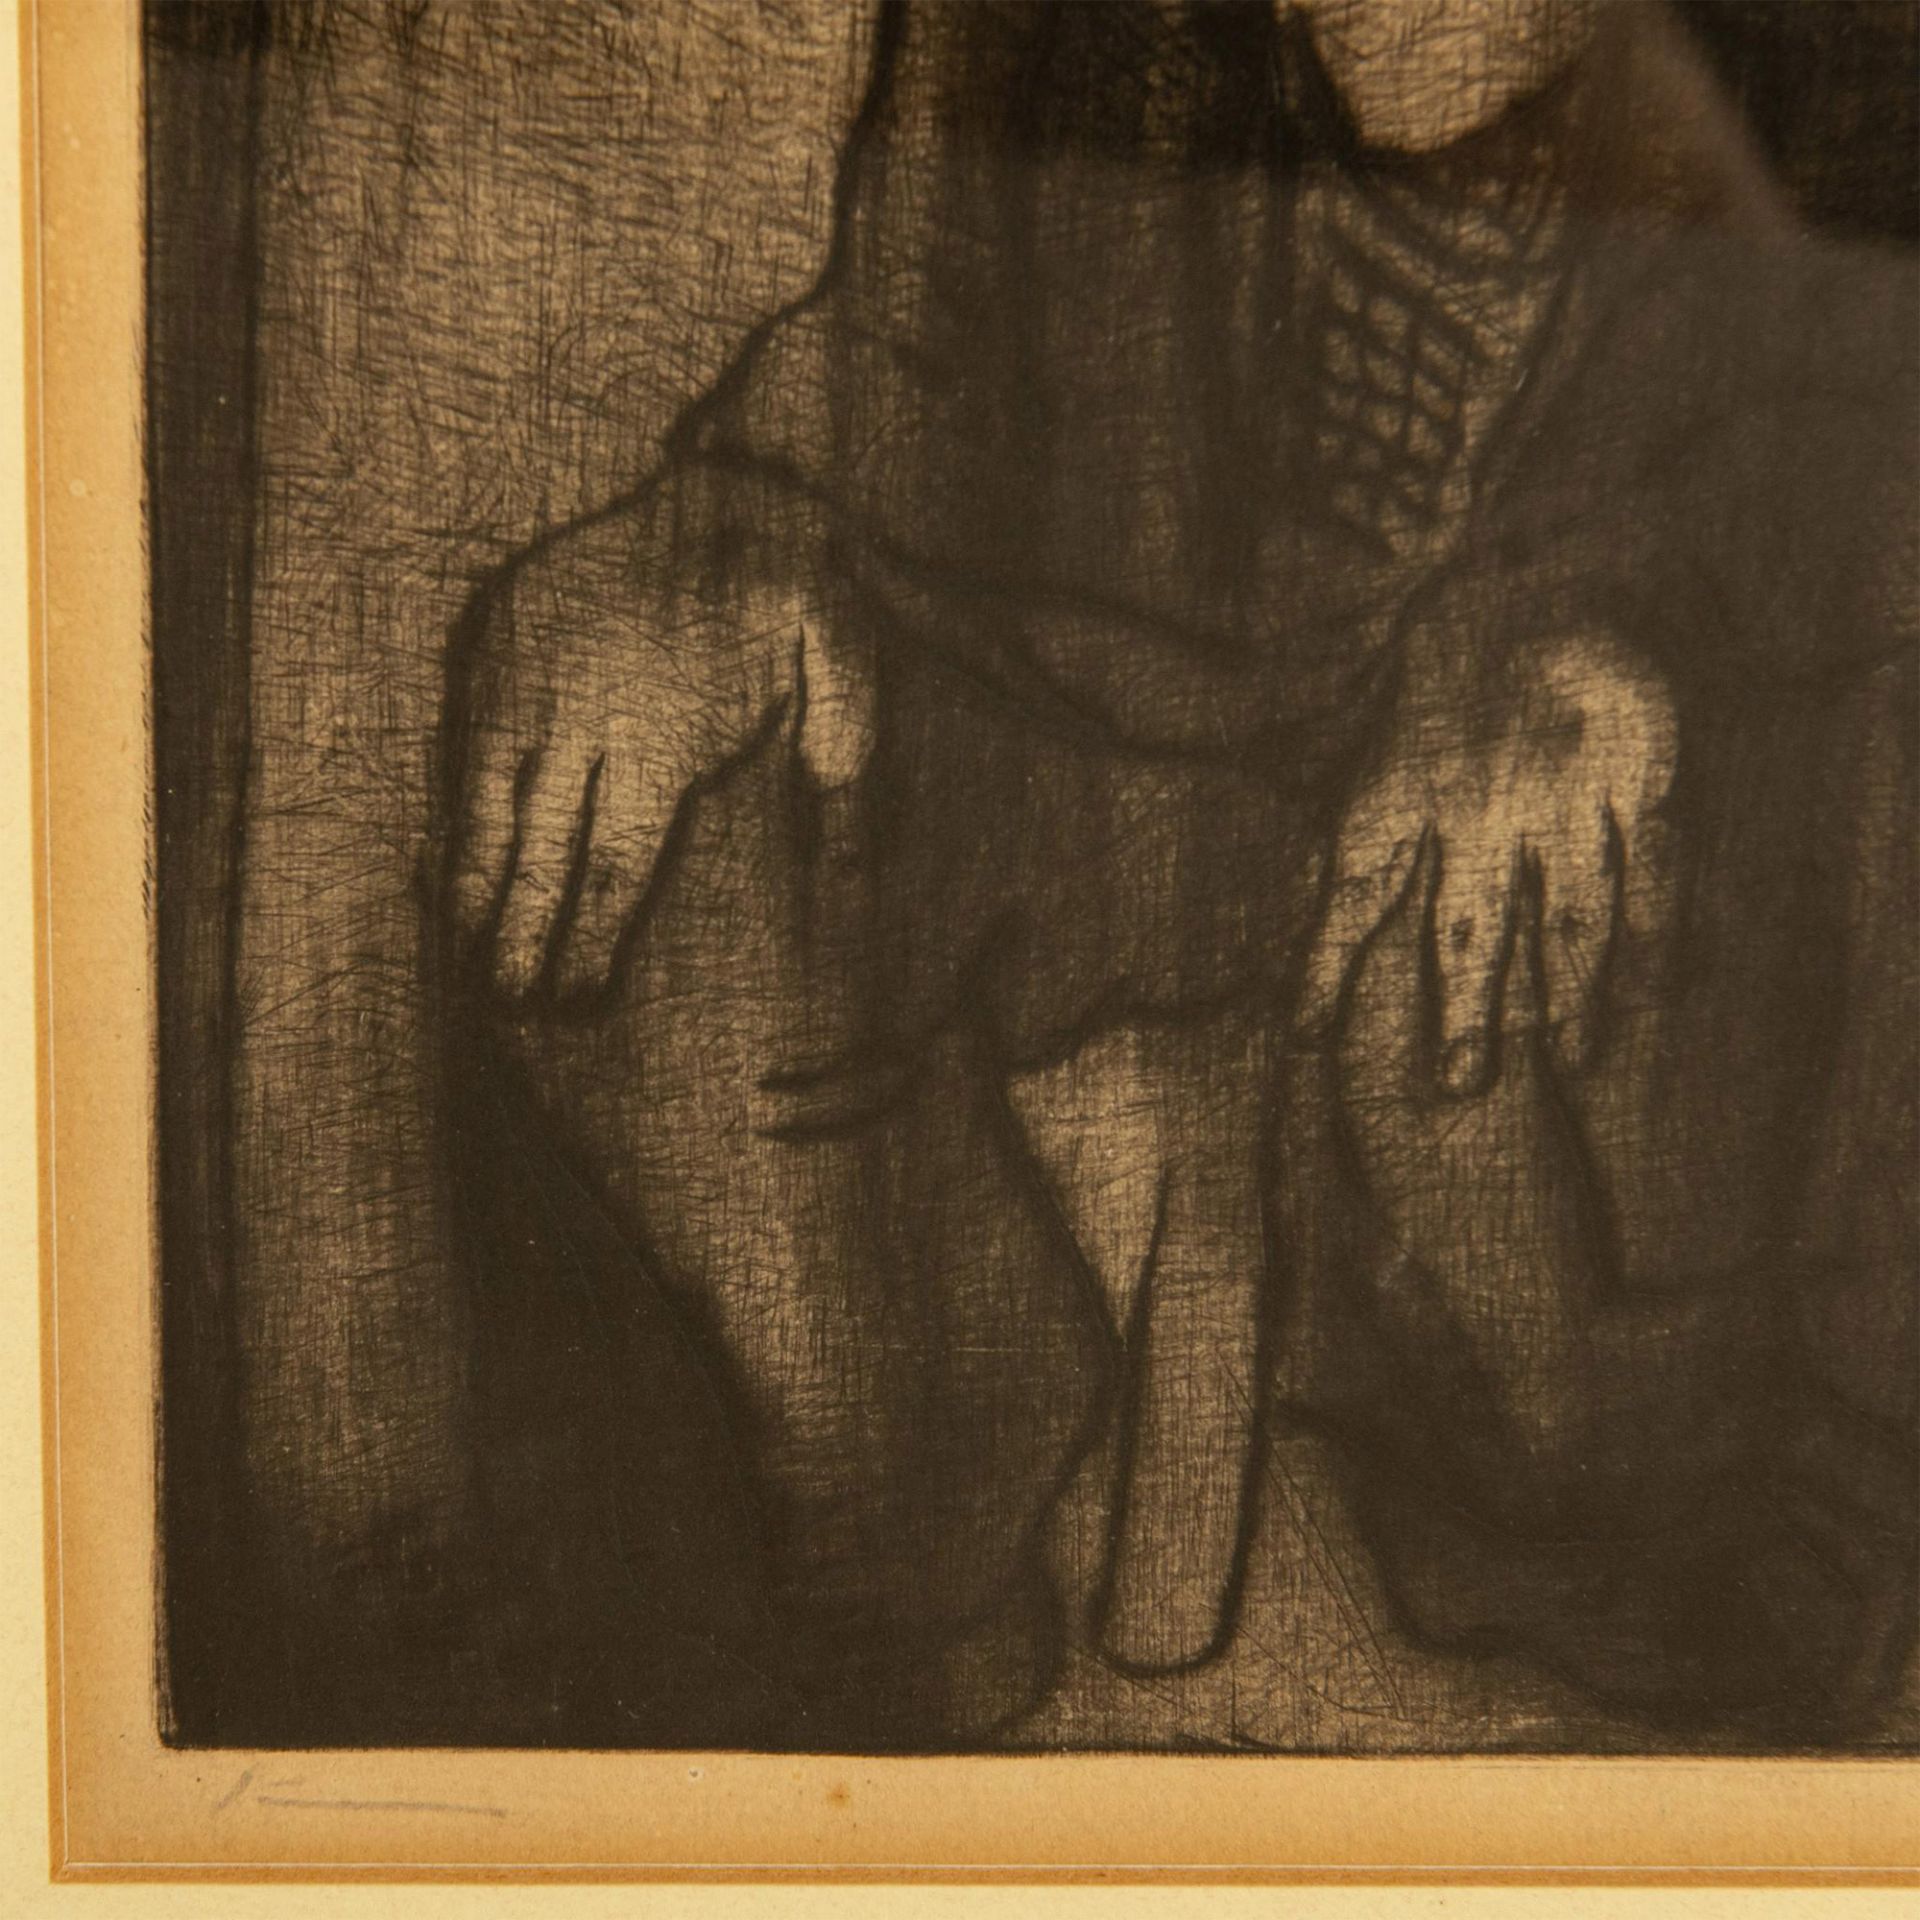 Original Monochrome Etching on Paper, Seated Rabbi, Signed - Image 5 of 6